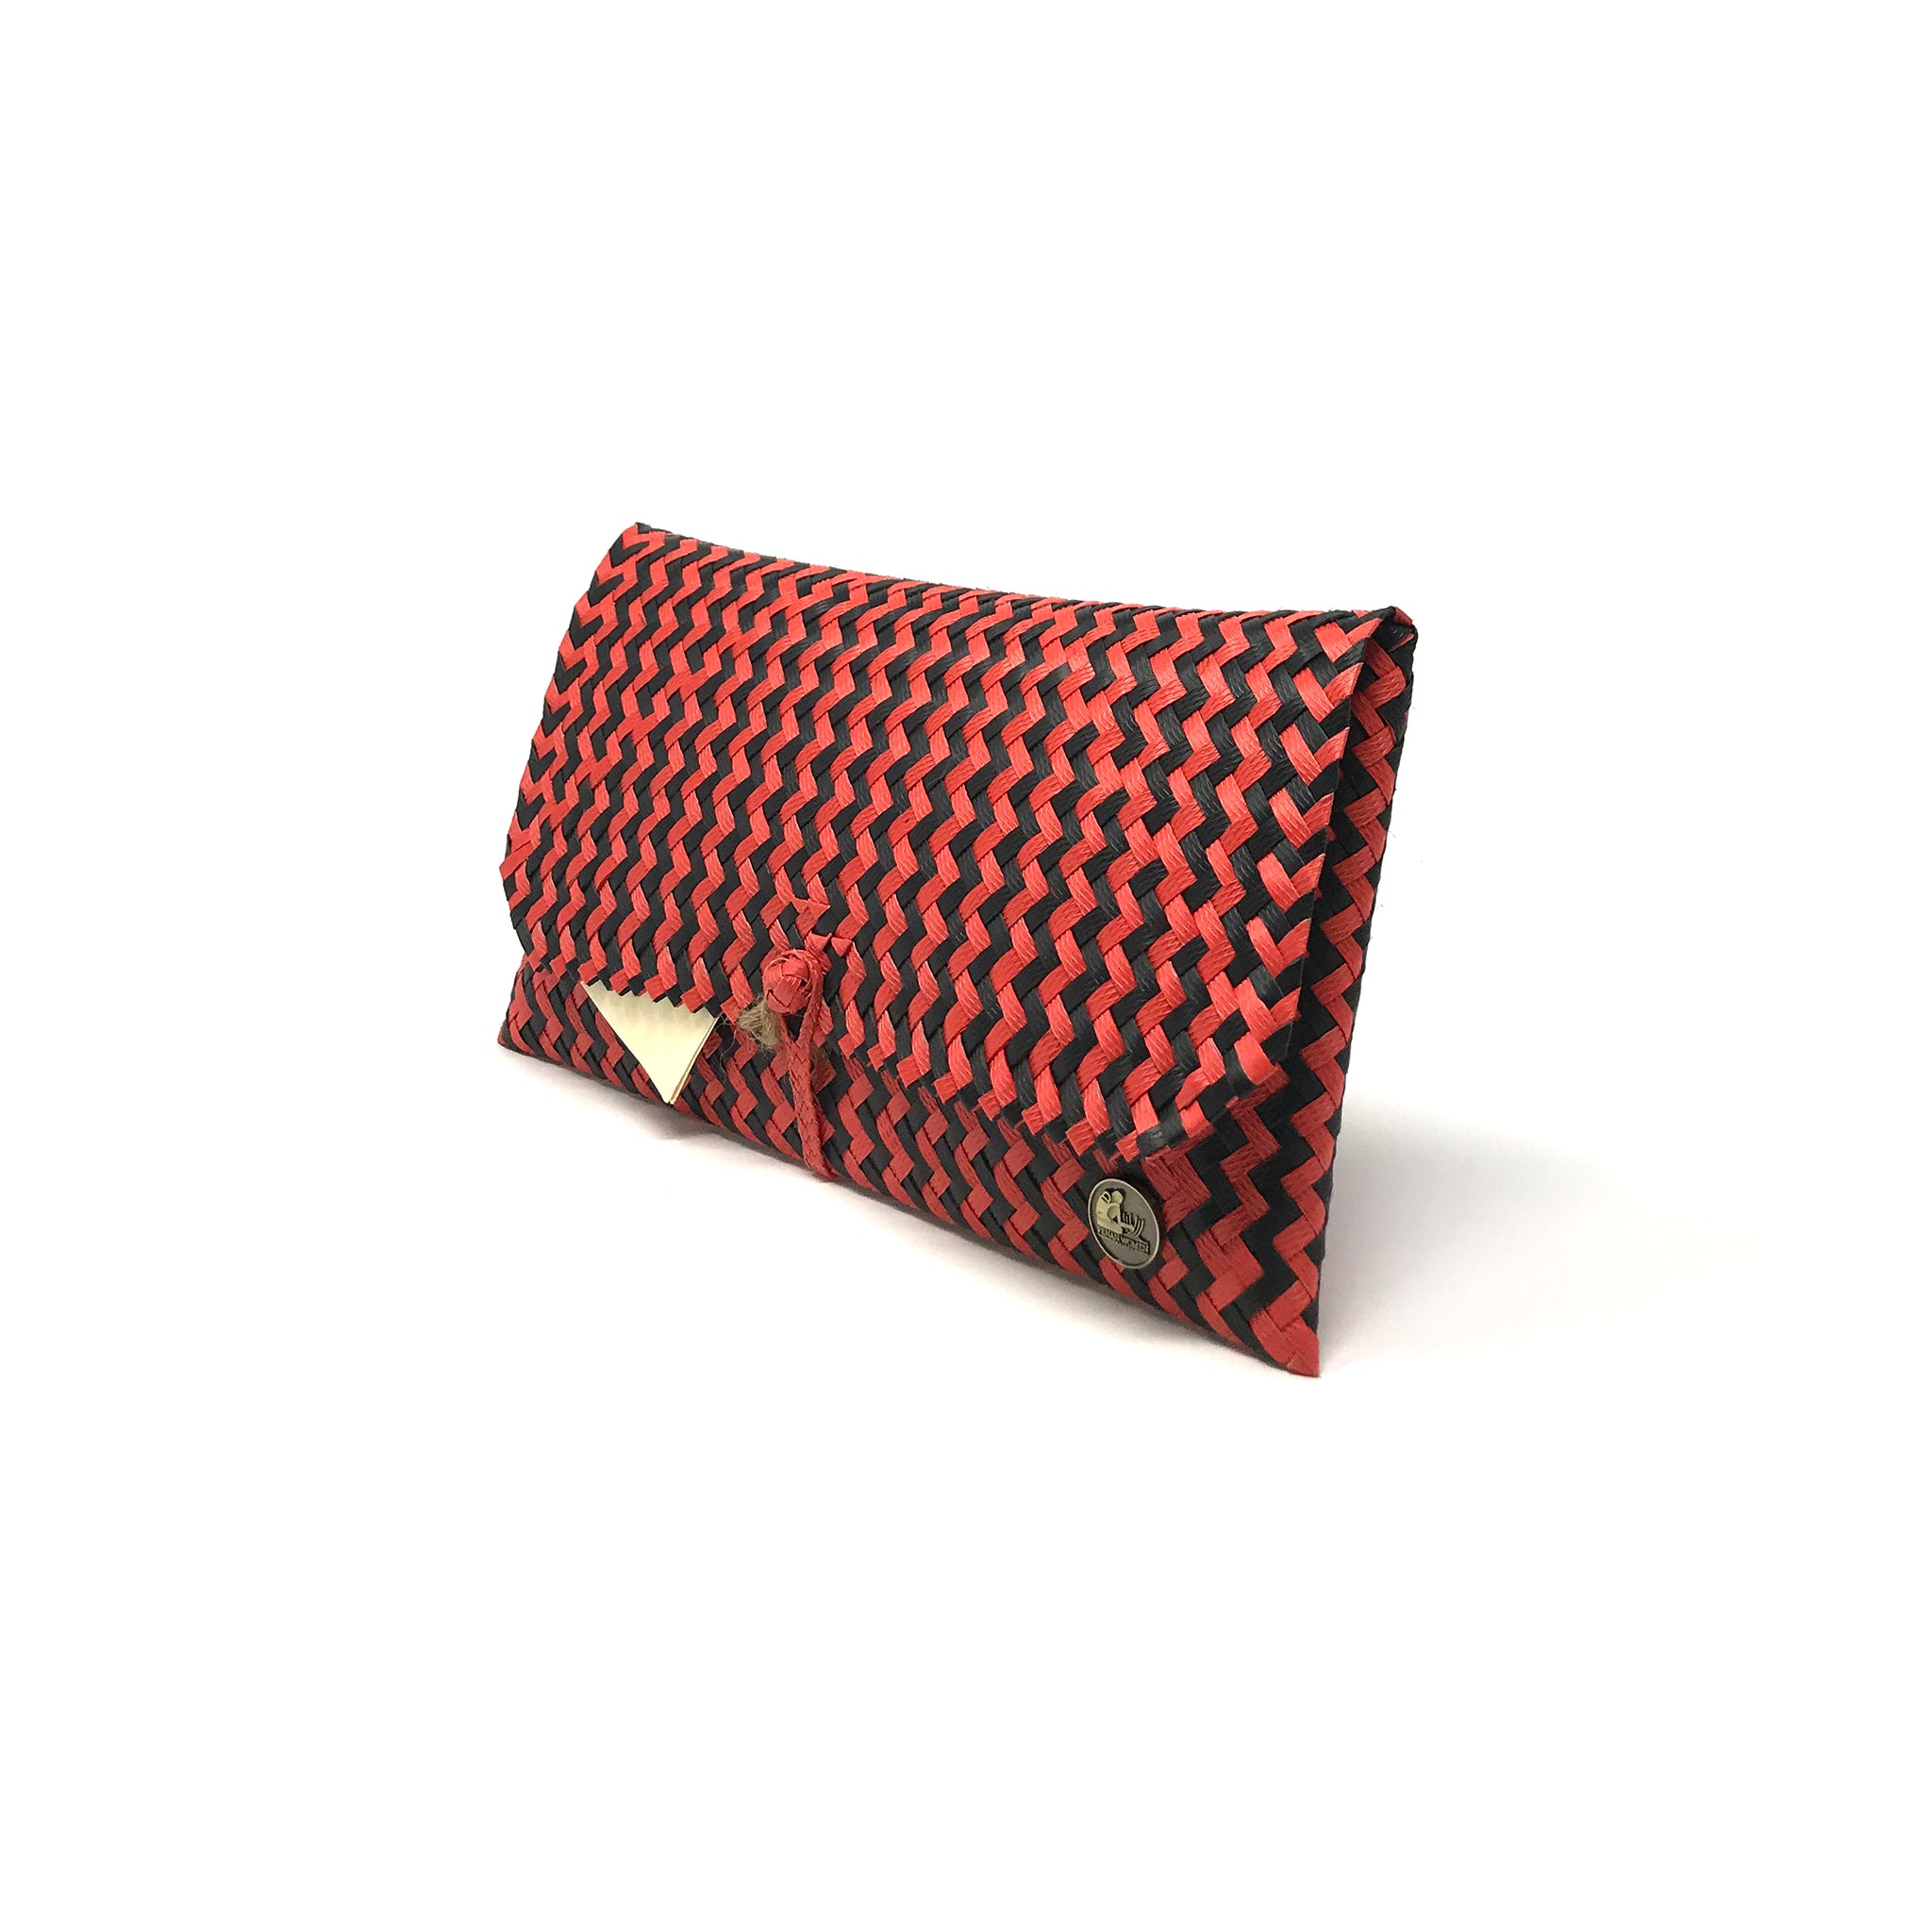 Red and black clutch at a 45-degree angle.